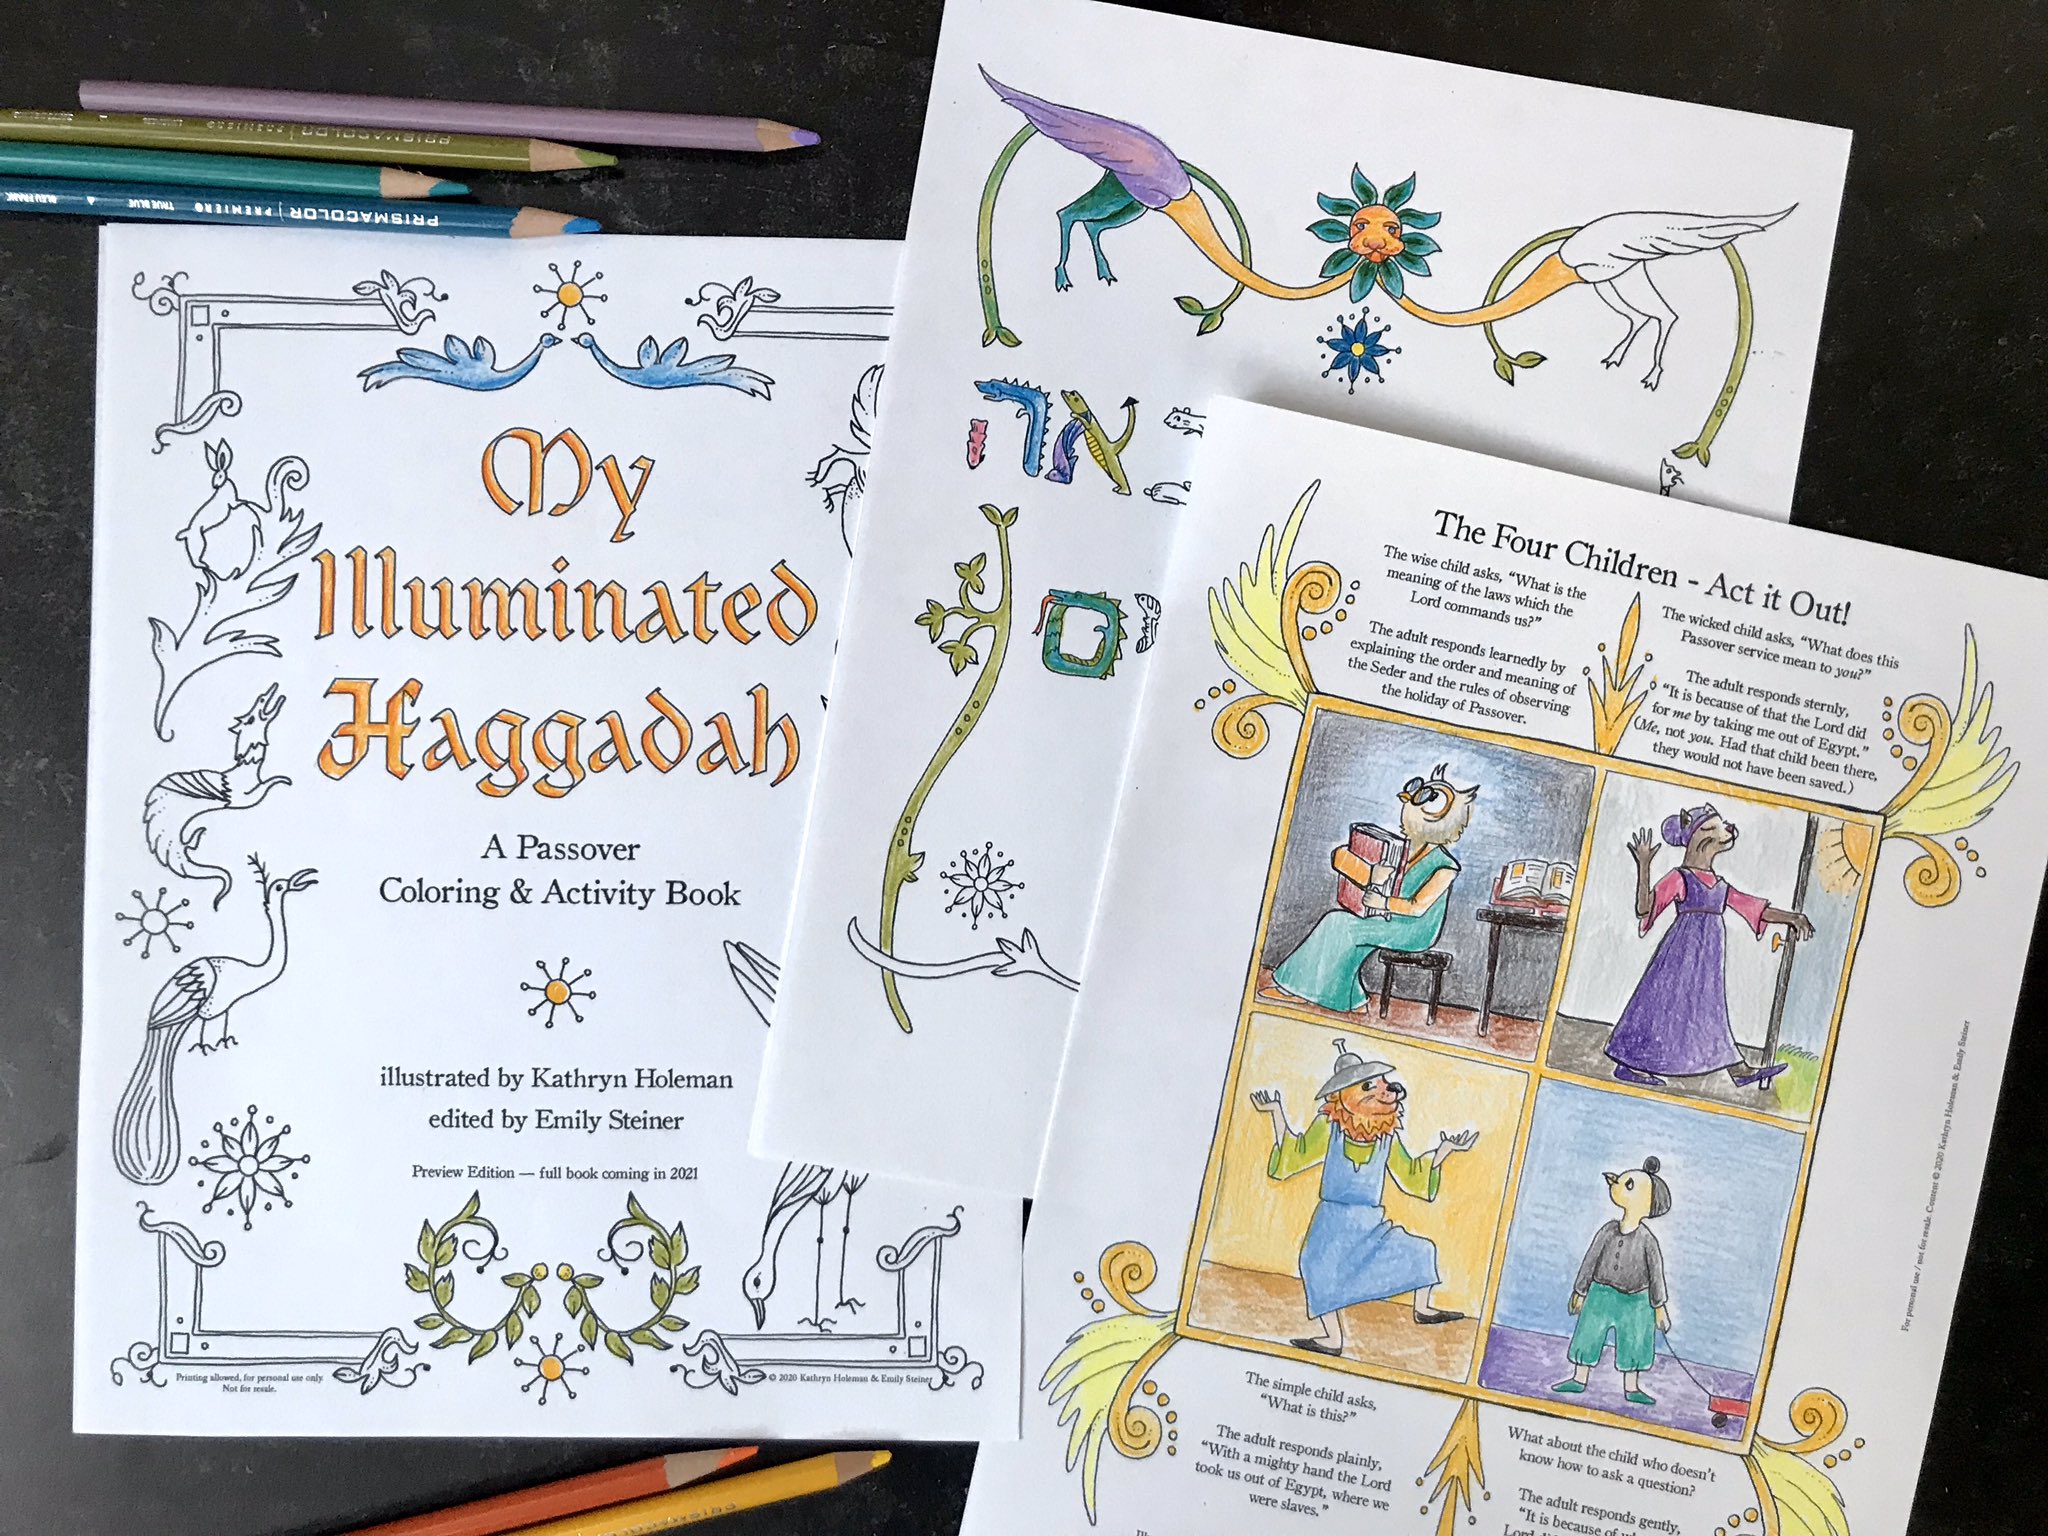 Download Emily Steiner On Twitter Don T Forget To Download Your Free Pages From Our Fab Coloring Book Haggadah Kathrynholeman And I Were Inspired By Medieval Manuscripts Passover2020 Medievaltwitter Https T Co E5rfxnu4d9 Https T Co Iypo1plpw8